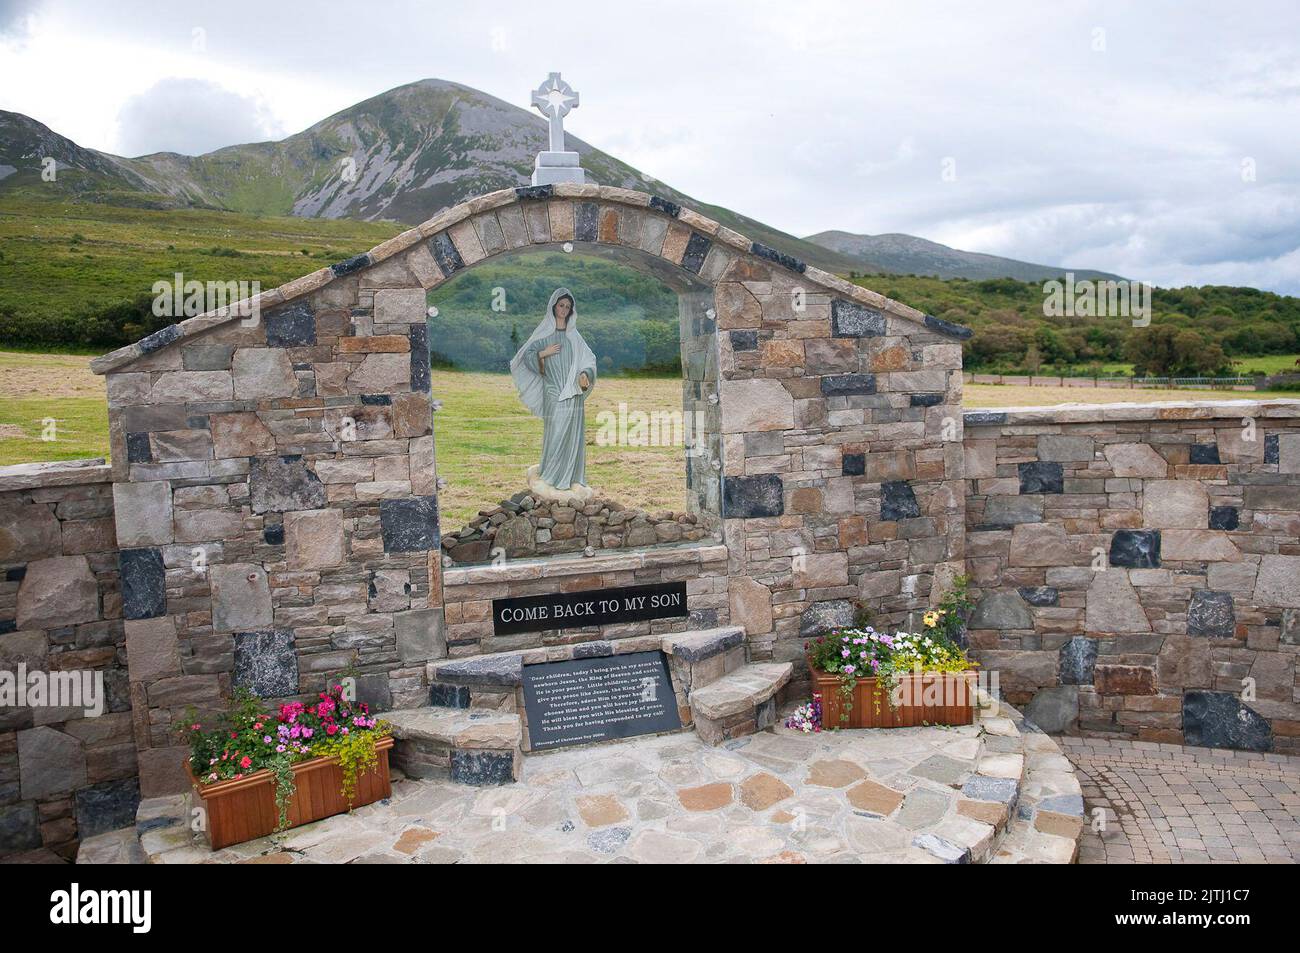 Shrine to the Virgin Mary at the foot of Croagh Patrick, from where Saint Patrick is said to have banished the snakes and lizards from Ireland, County Mayo, Republic of Ireland Stock Photo